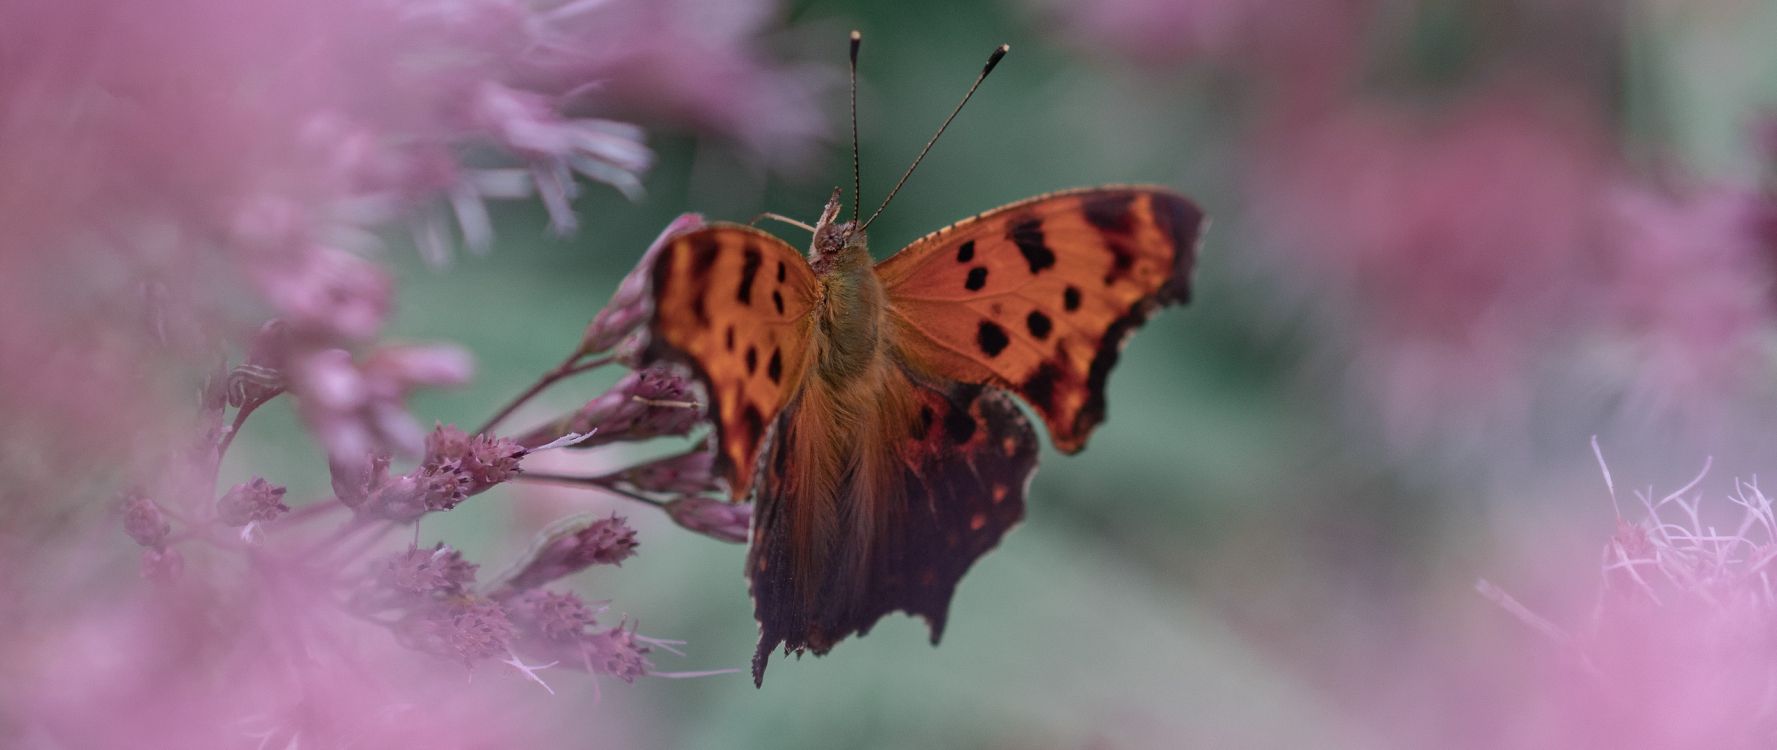 Brown and Black Butterfly on Purple Flower. Wallpaper in 2560x1080 Resolution